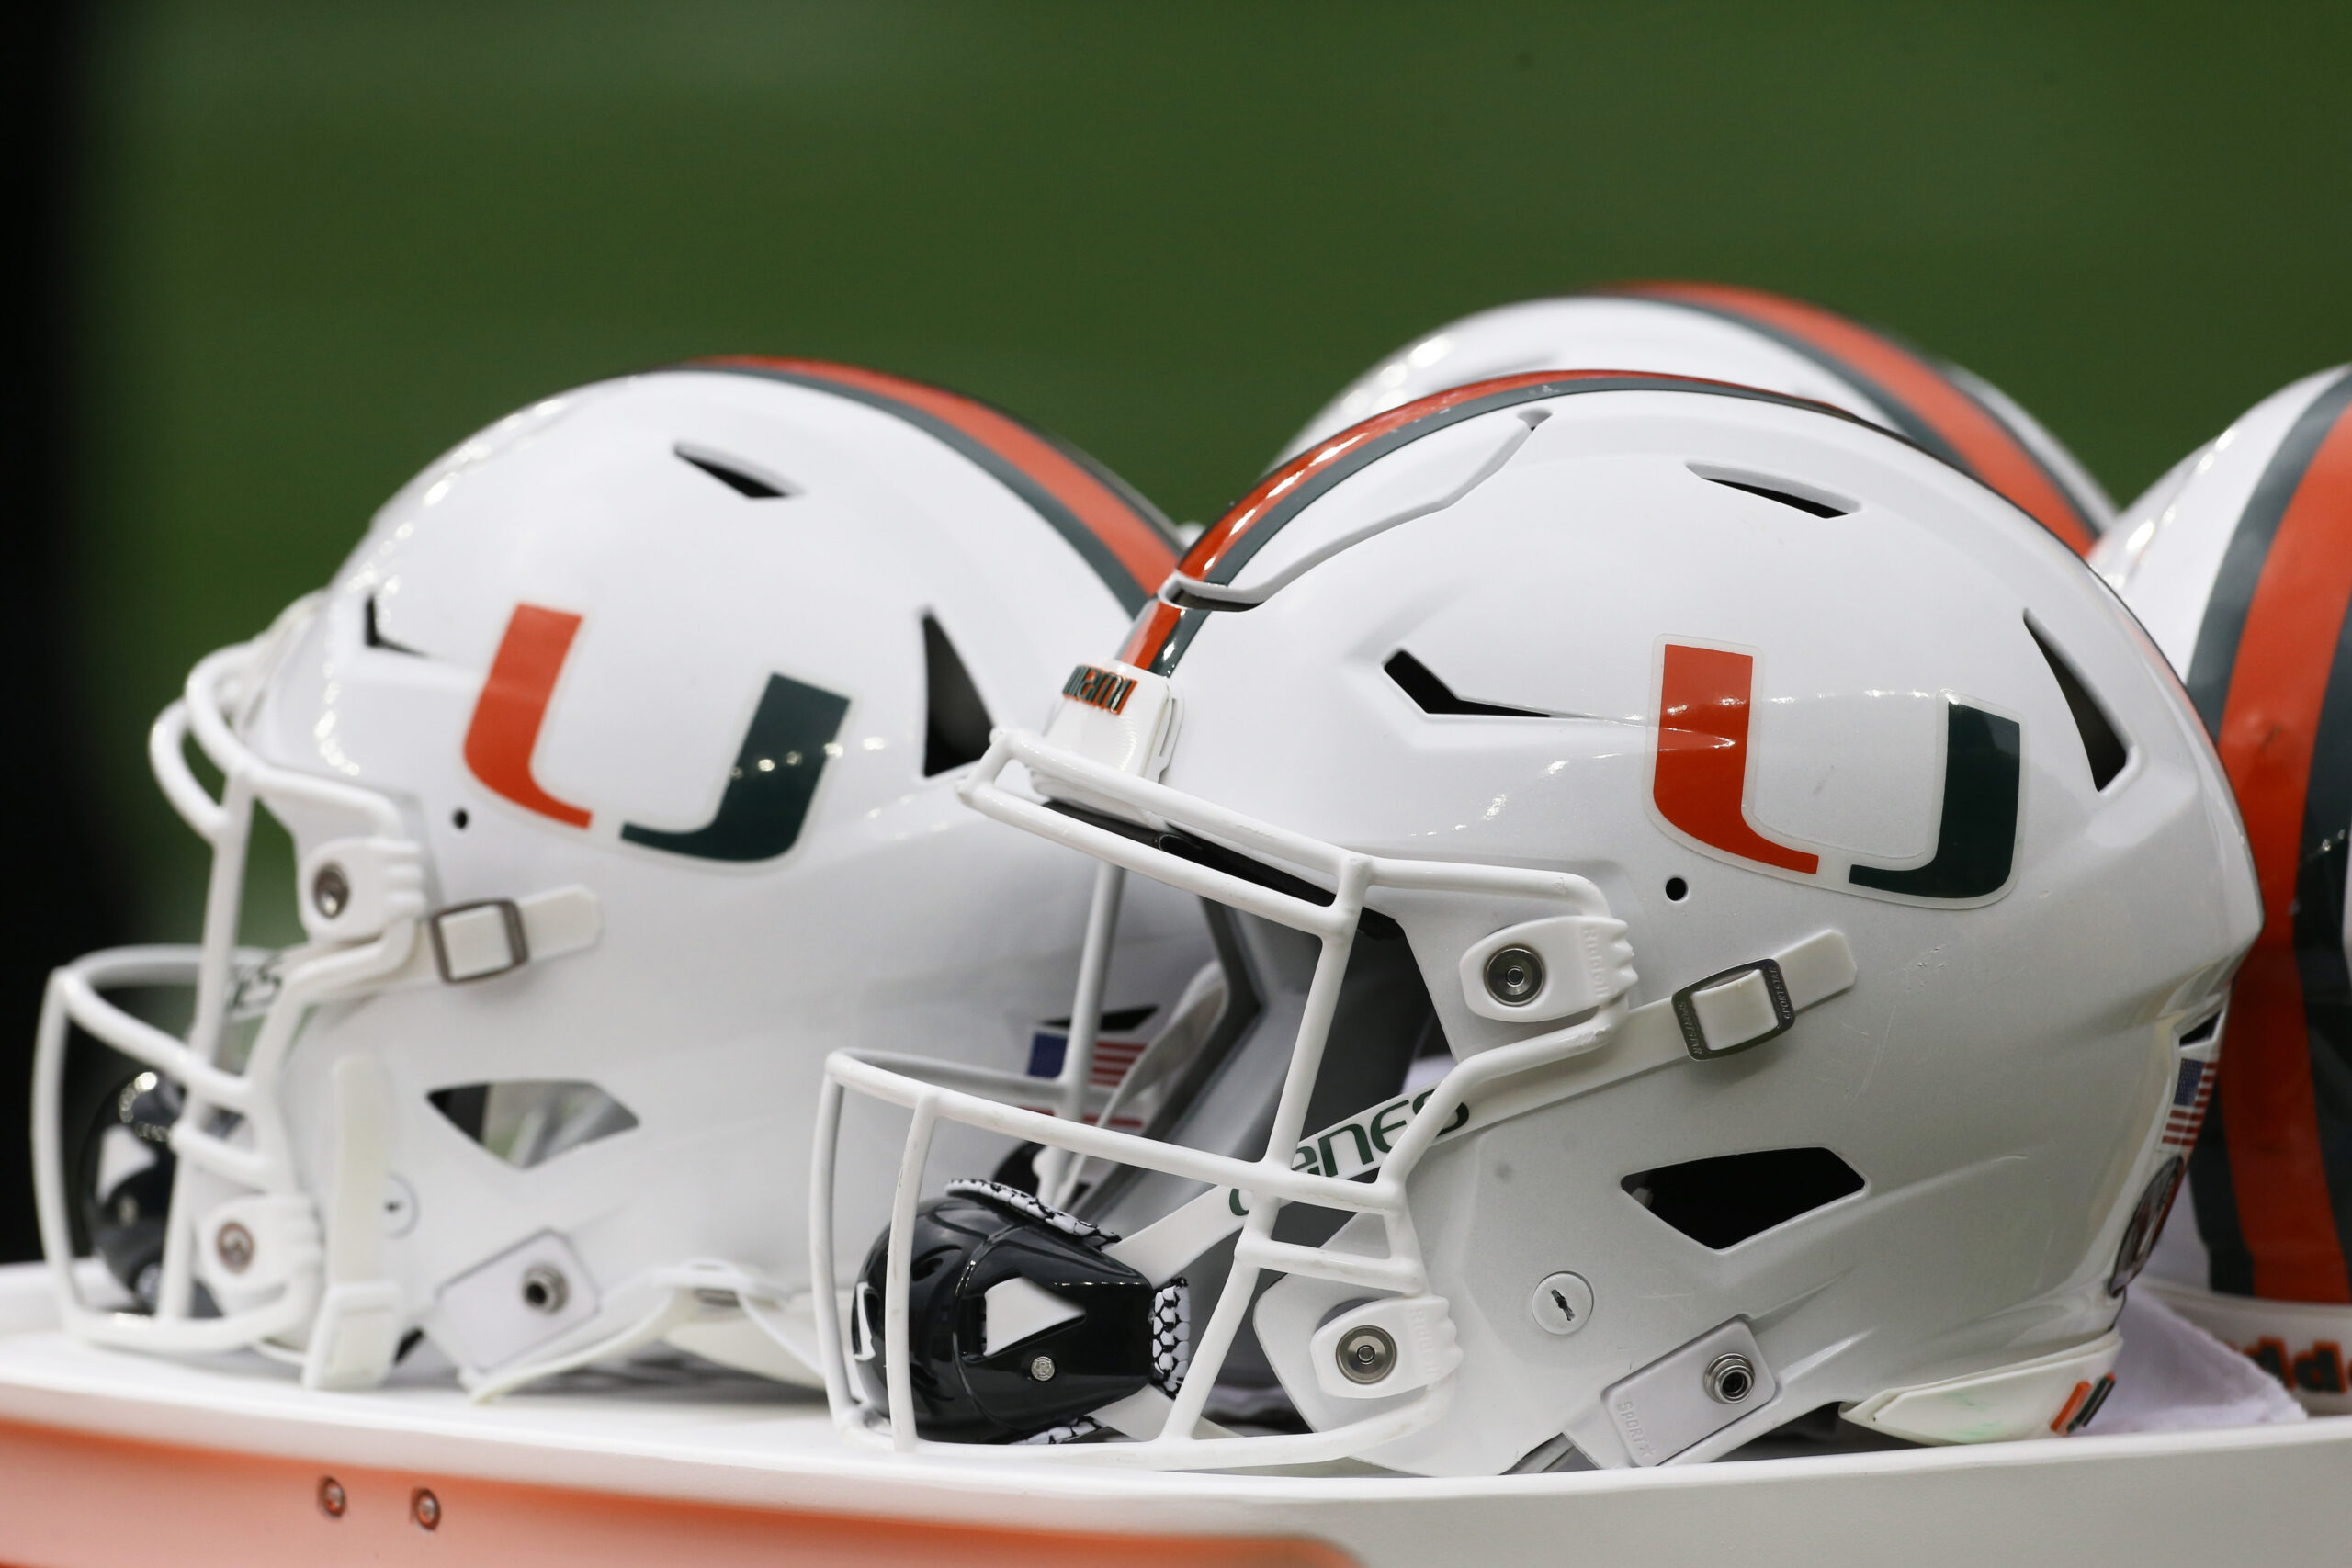 Miami football projected to finish 10-2 by national website